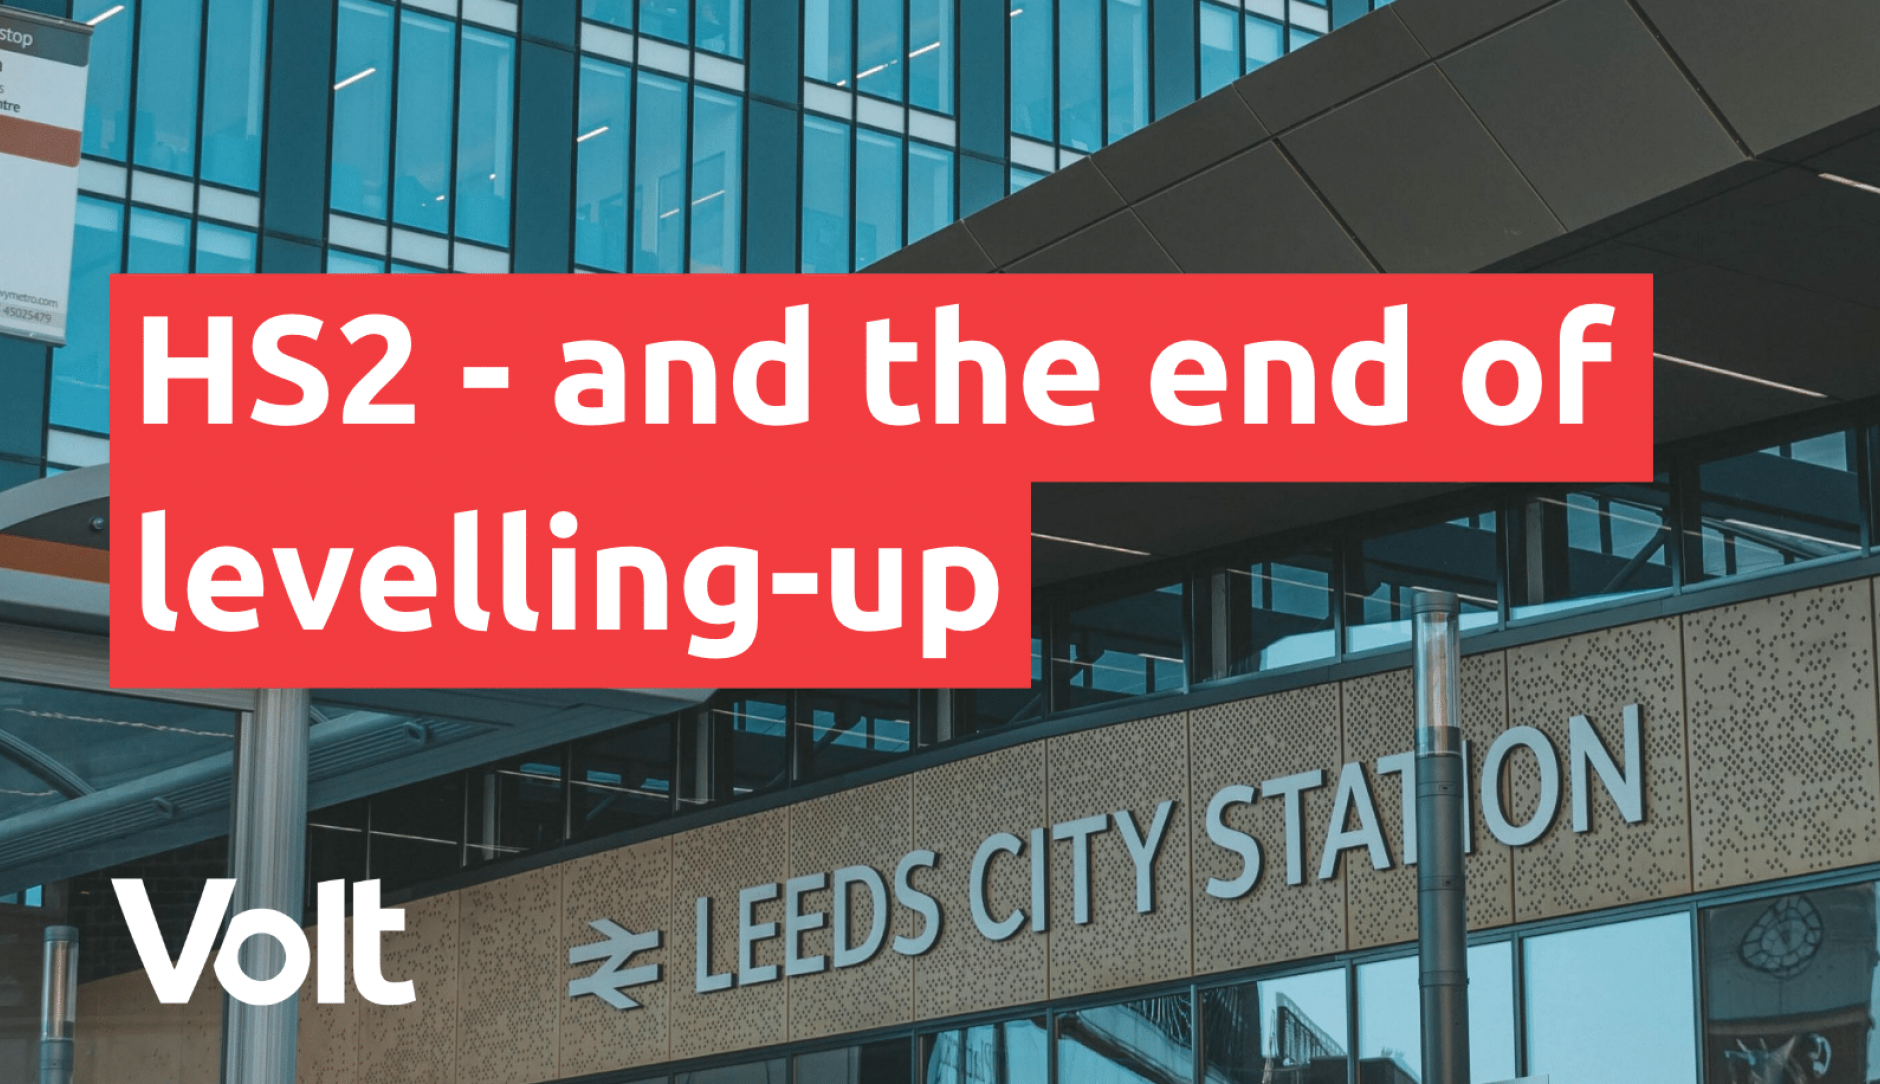 HS2 - and the end of levelling-up - Image displaying the Leeds City Station